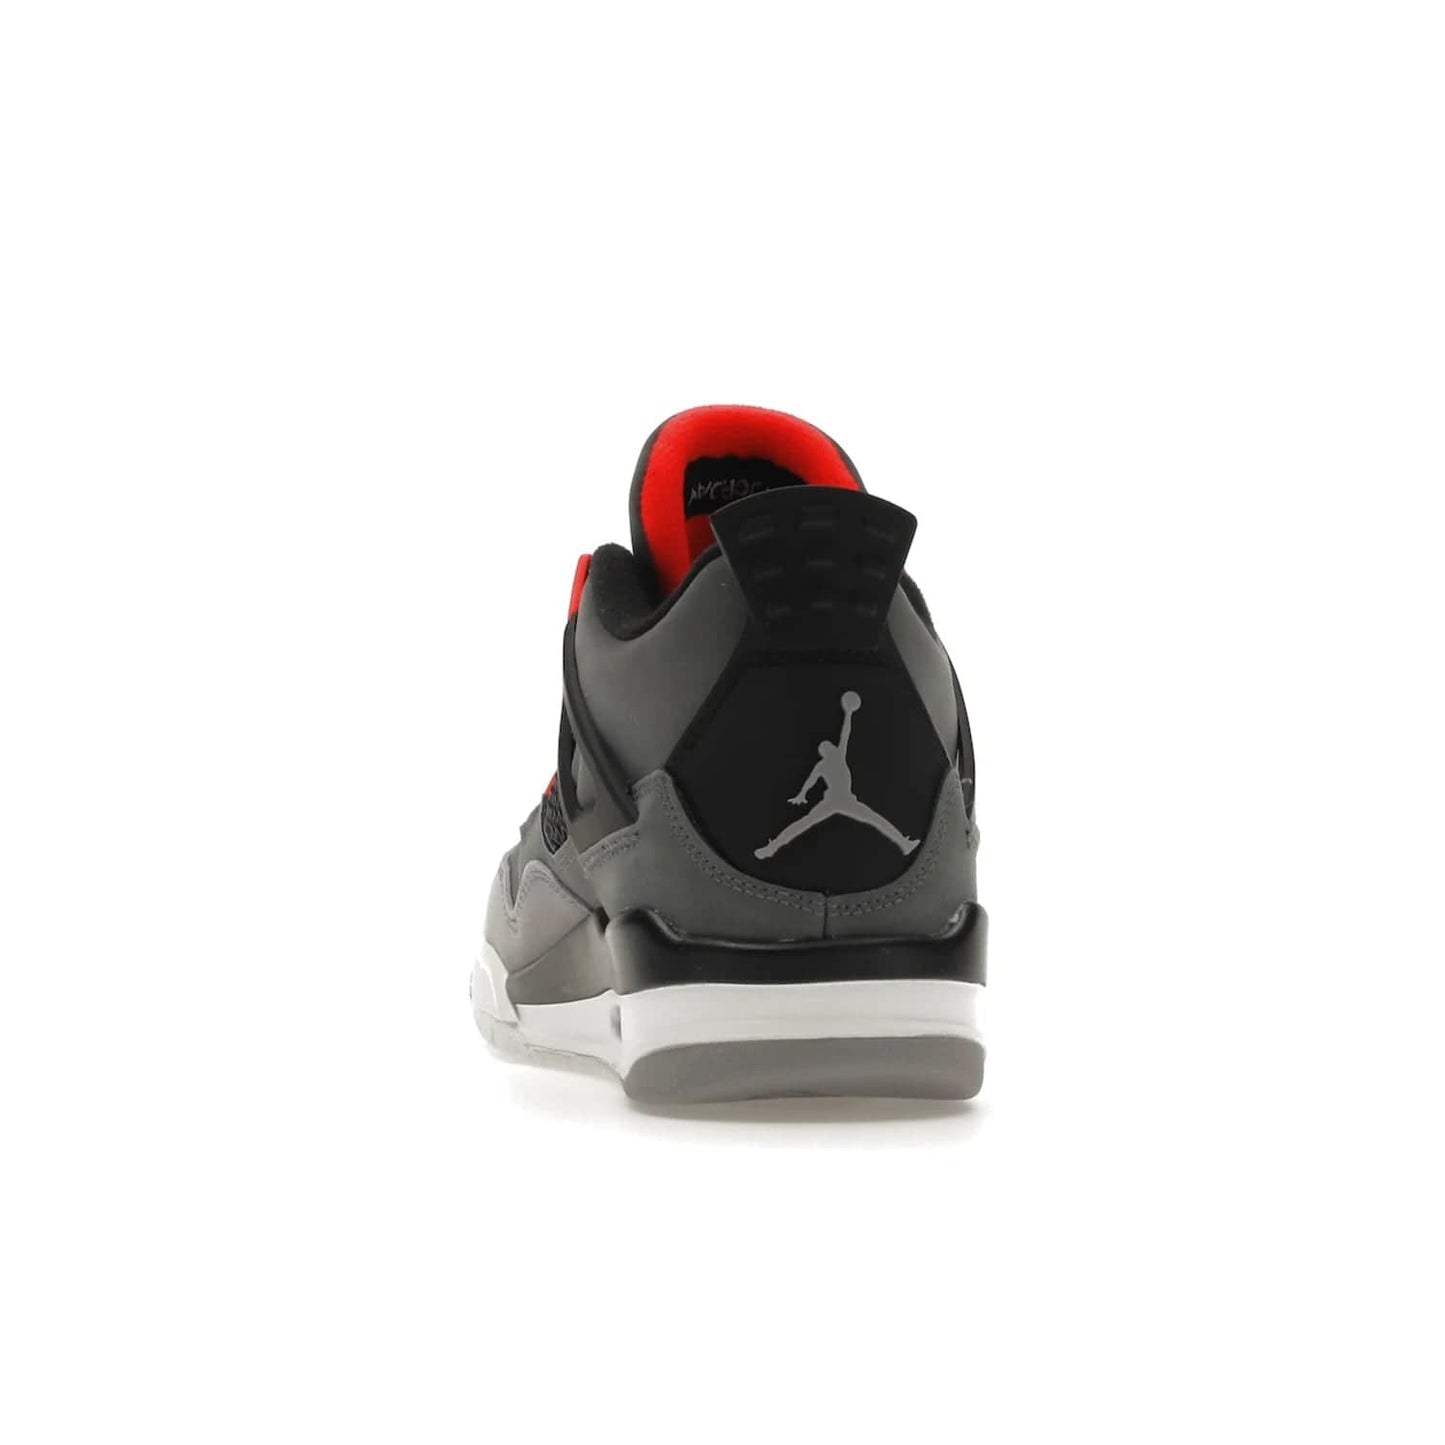 Jordan 4 Retro Infrared (GS) - Image 27 - Only at www.BallersClubKickz.com - Shop the Air Jordan 4 Retro Infrared (GS) for a classic silhouette with subtle yet bold features. Dark grey nubuck upper with lighter forefoot overlay, black accents, Infrared molded eyelets & woven tongue tag. Available June 2022.